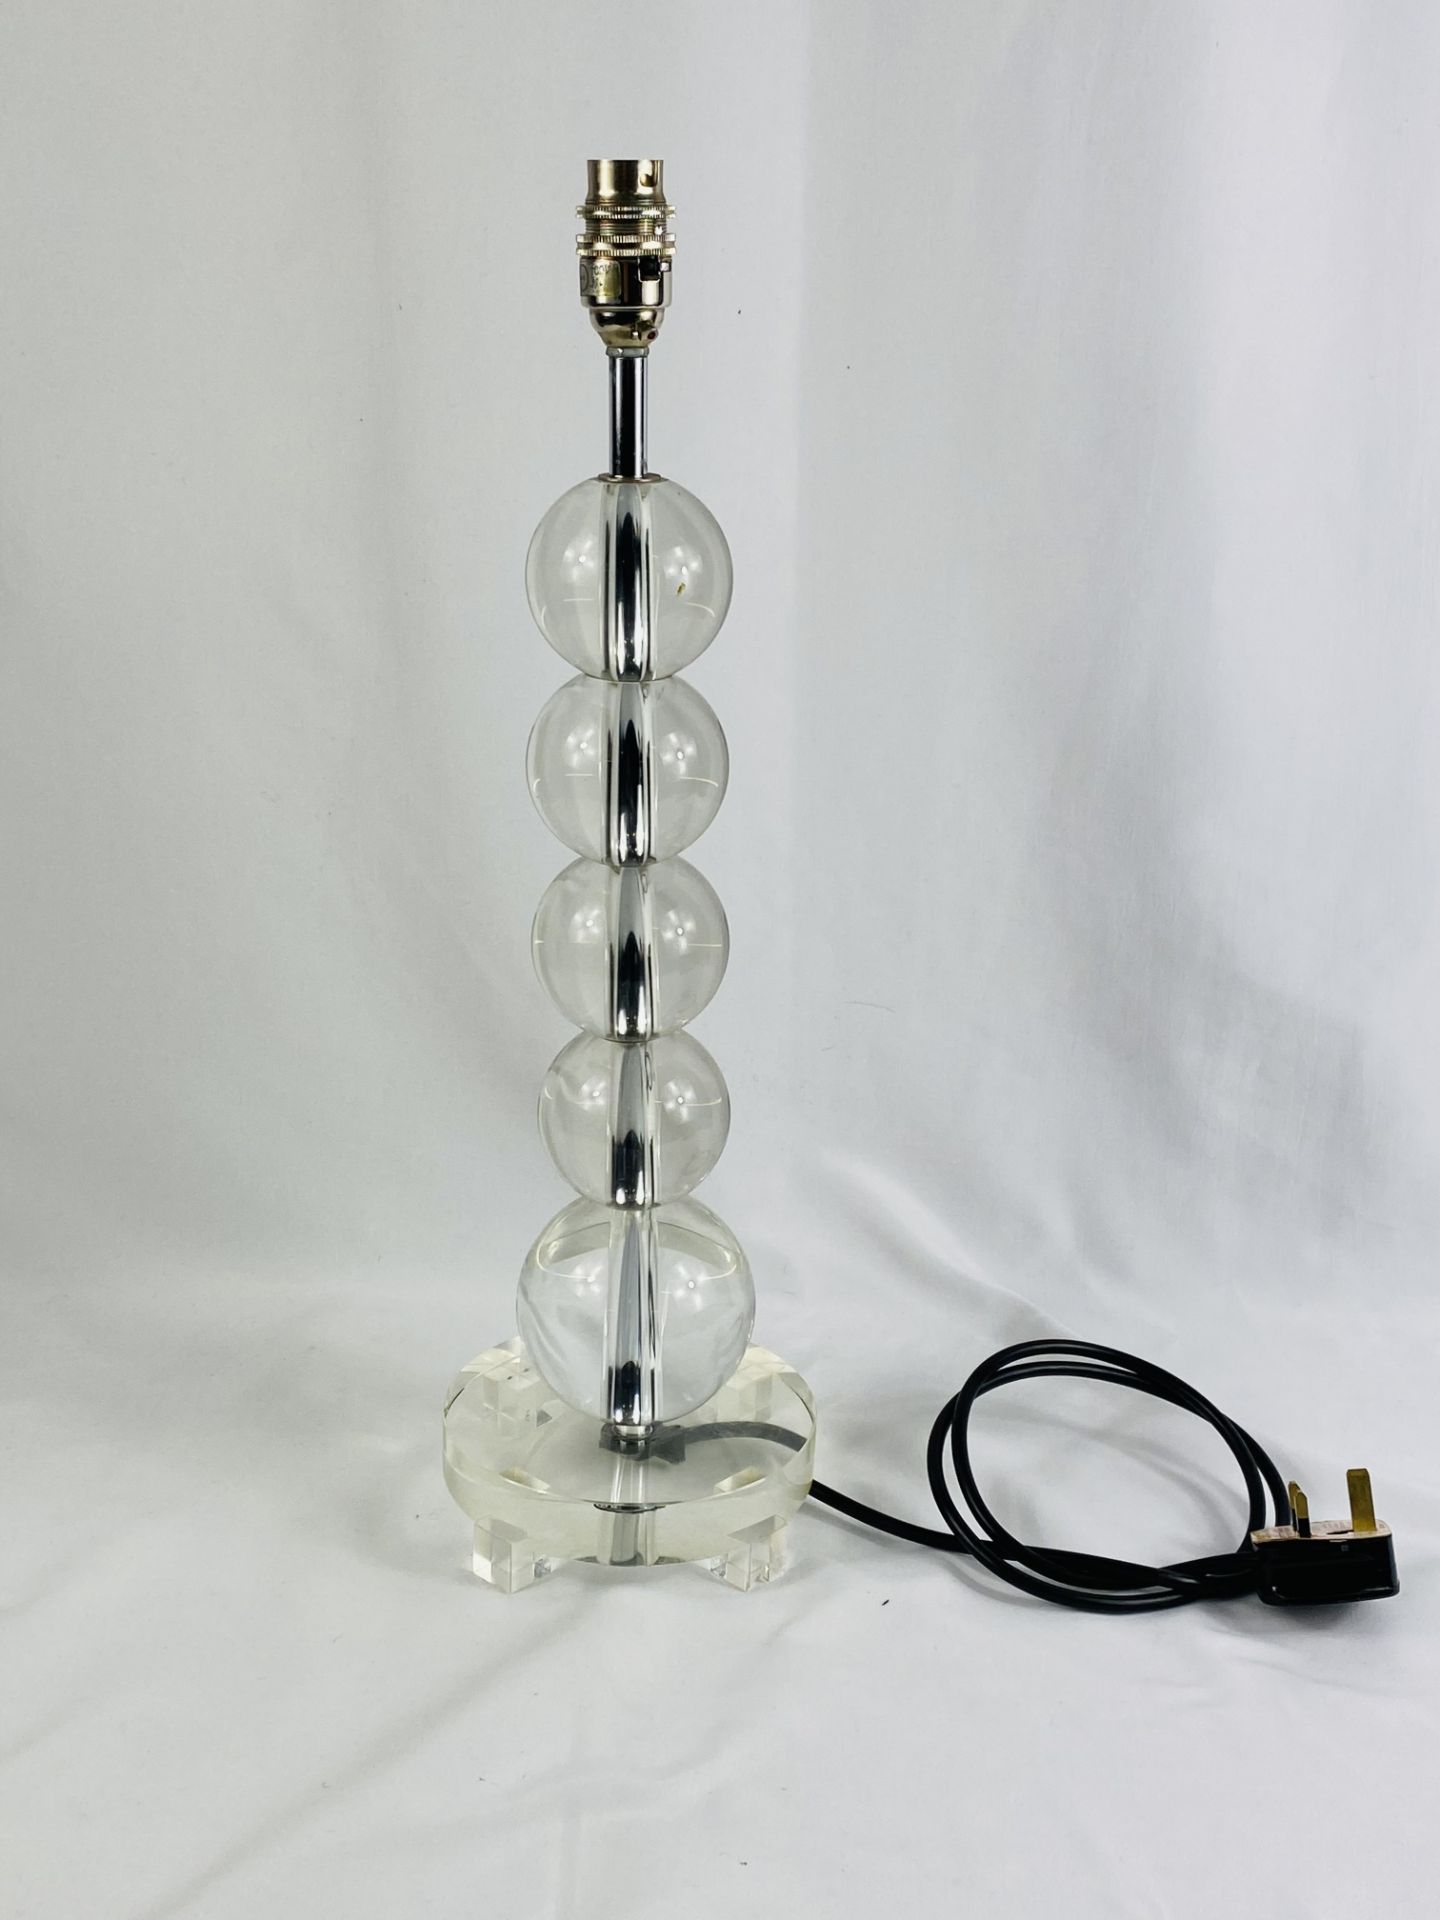 Contemporary glass and chrome table lamp - Image 3 of 5